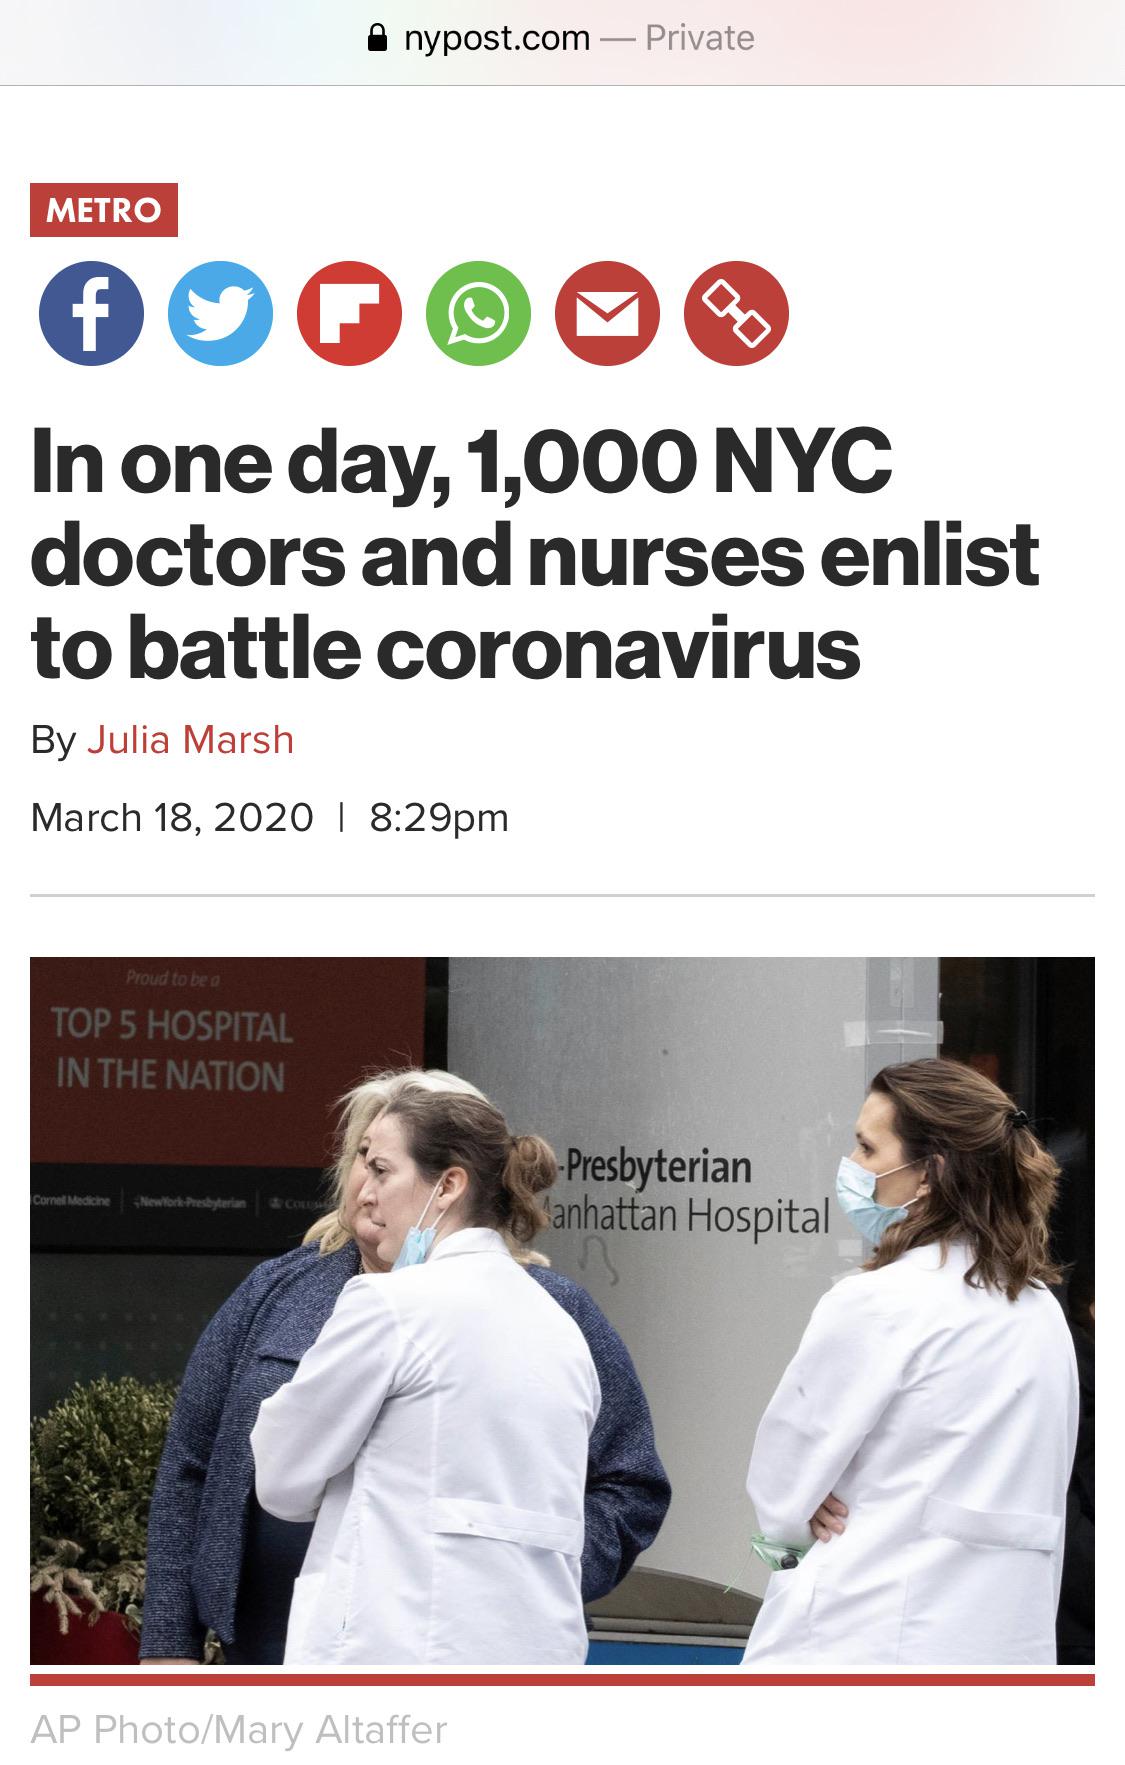 conversation - nypost.com Private Metro In one day, 1,000 Nyc doctors and nurses enlist to battle coronavirus By Julia Marsh | pm Proud to be Top 5 Hospital In The Nation Cornet Mediche Mewtork Presbyterias e Comu Presbyterian anhattan Hospital Ap PhotoMa